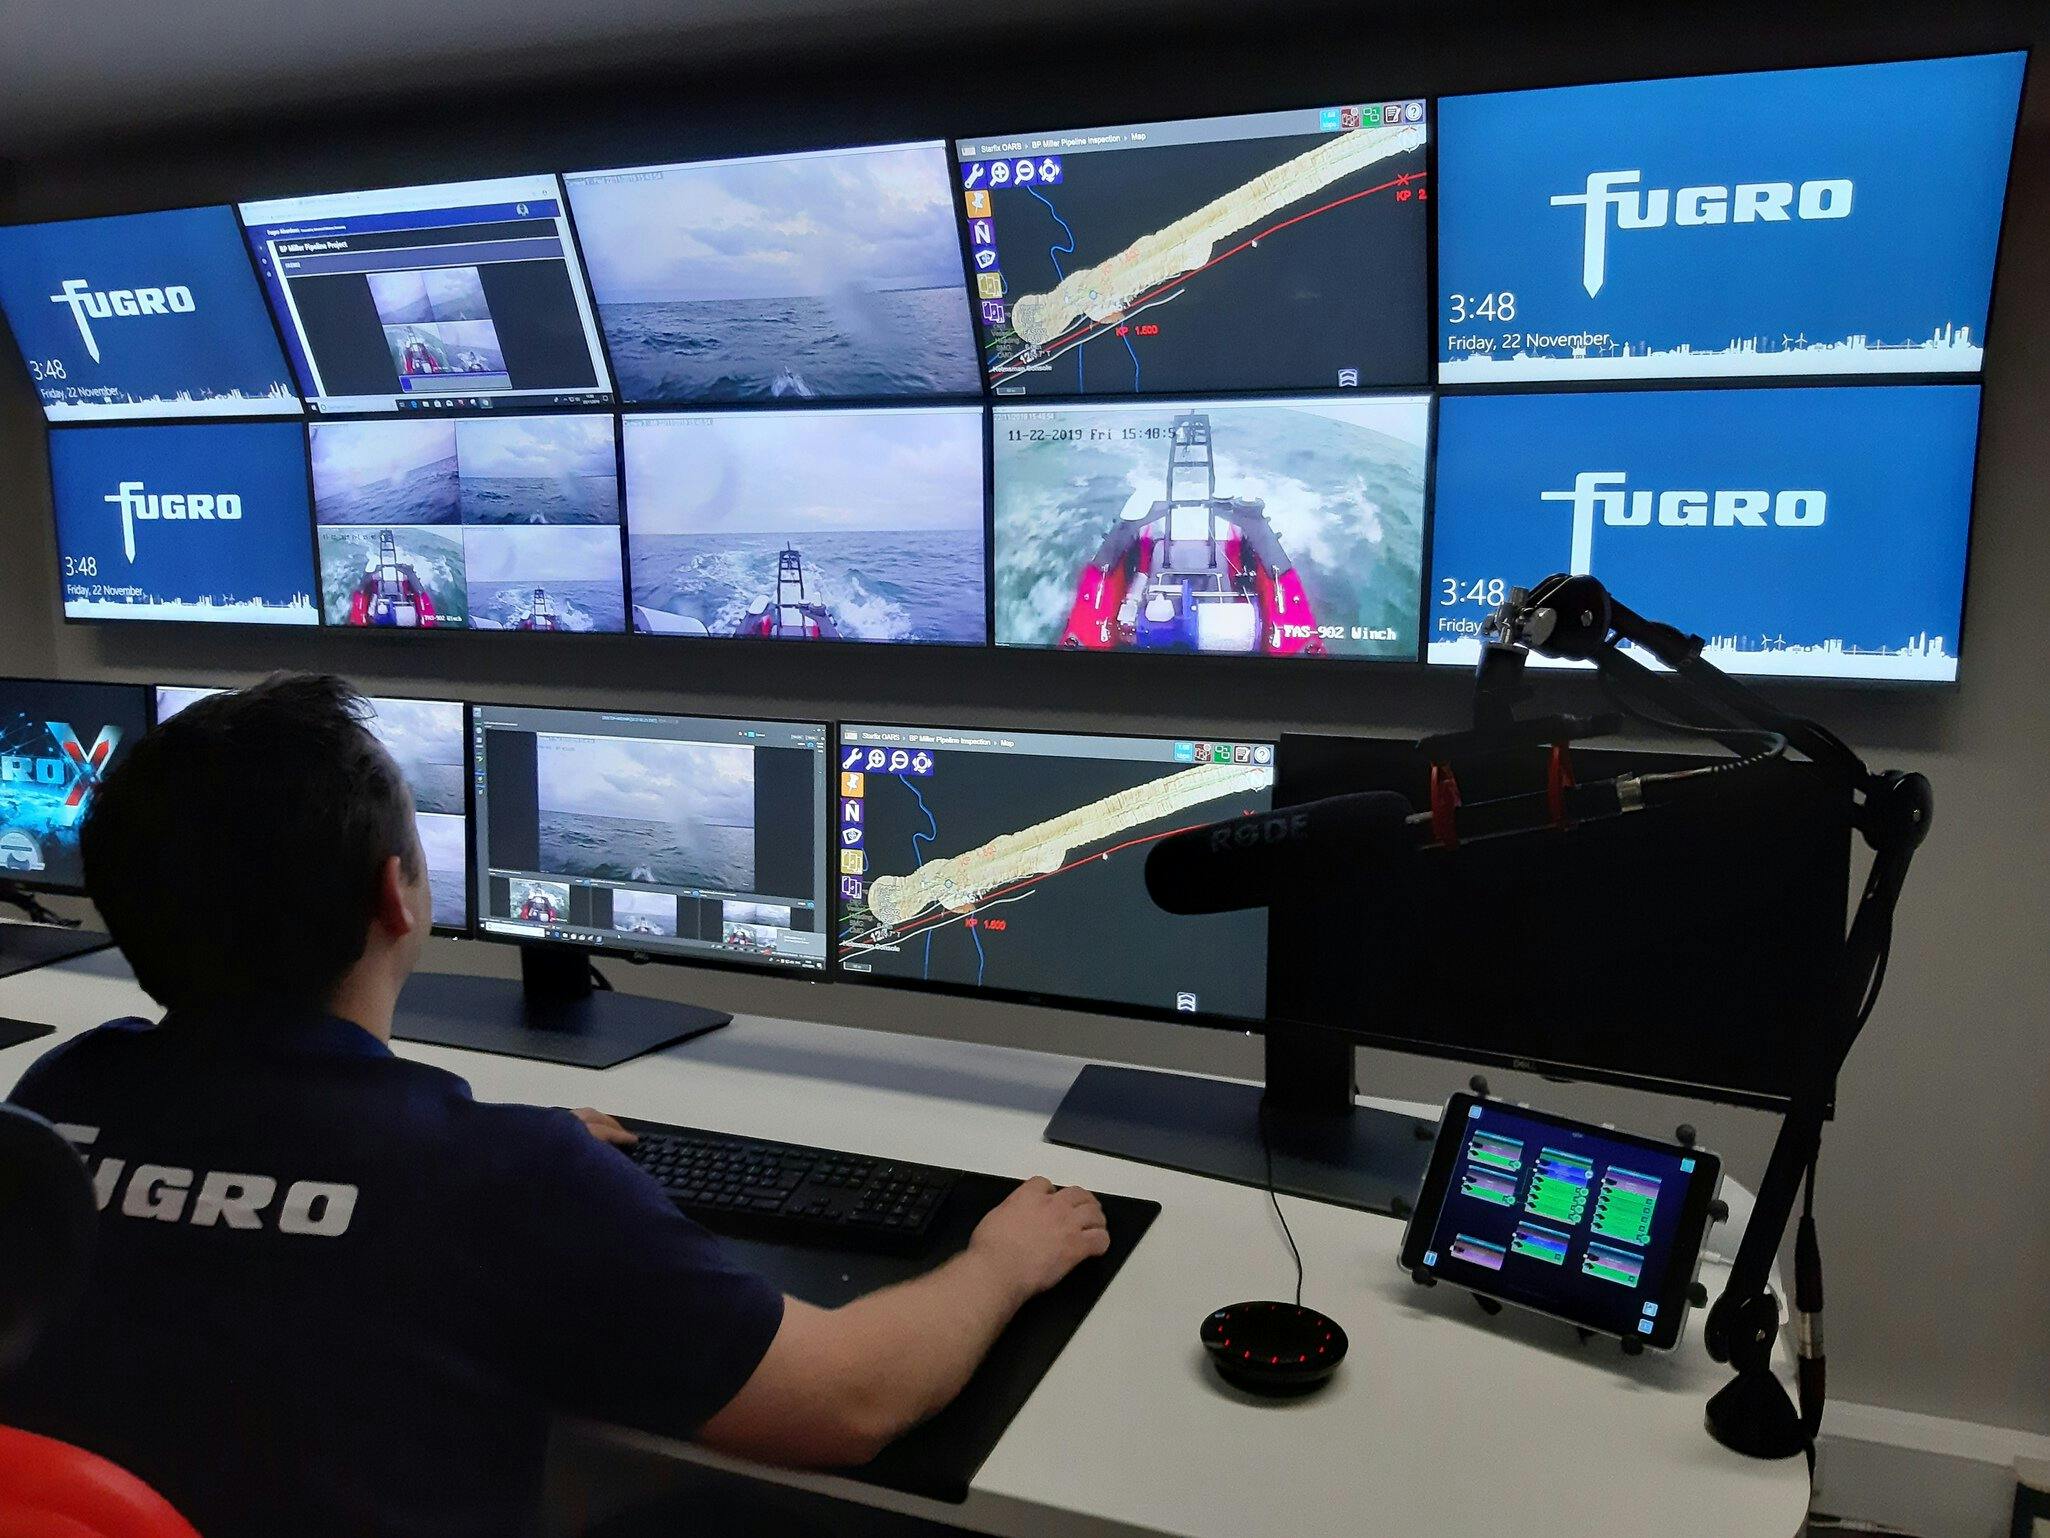 Remote operations centre in Aberdeen, UK